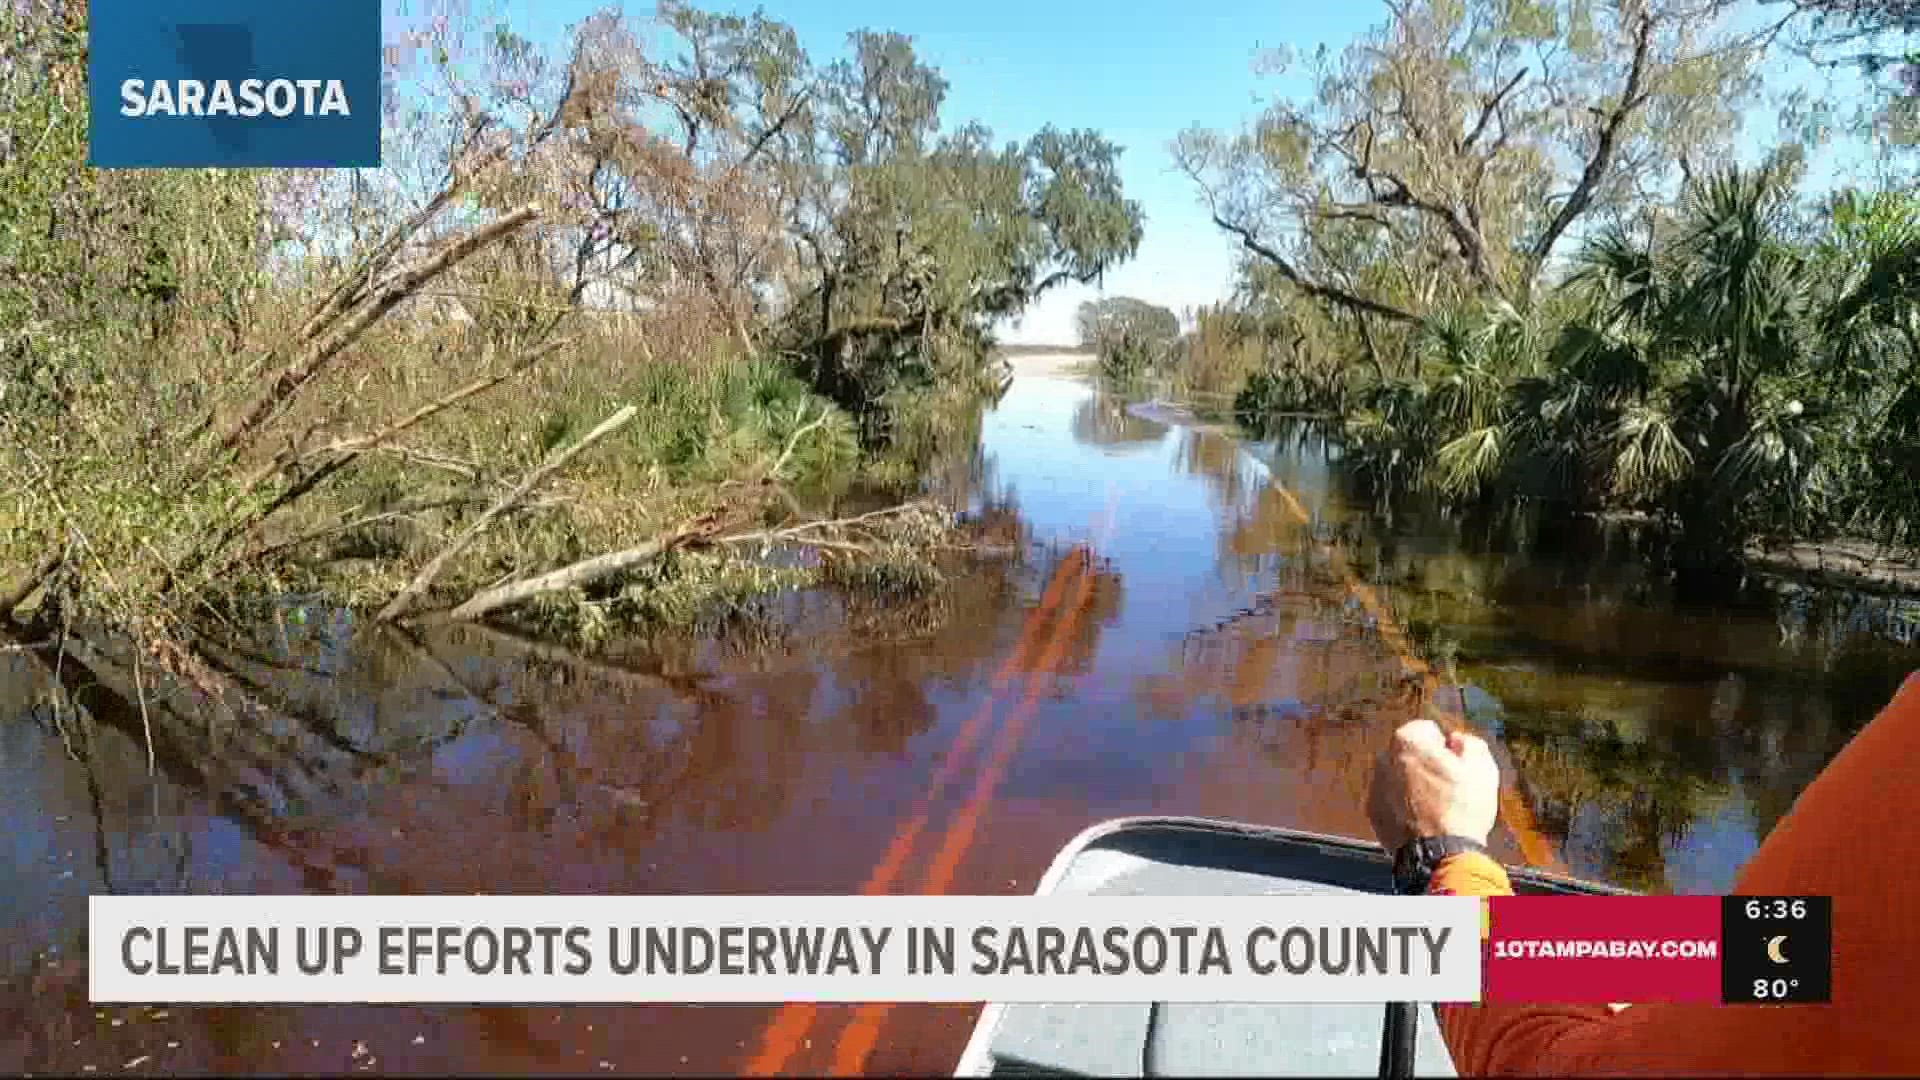 We talked to the Hidden River community in Sarasota, affected by a levee break which caused significant flooding after Hurricane Ian.